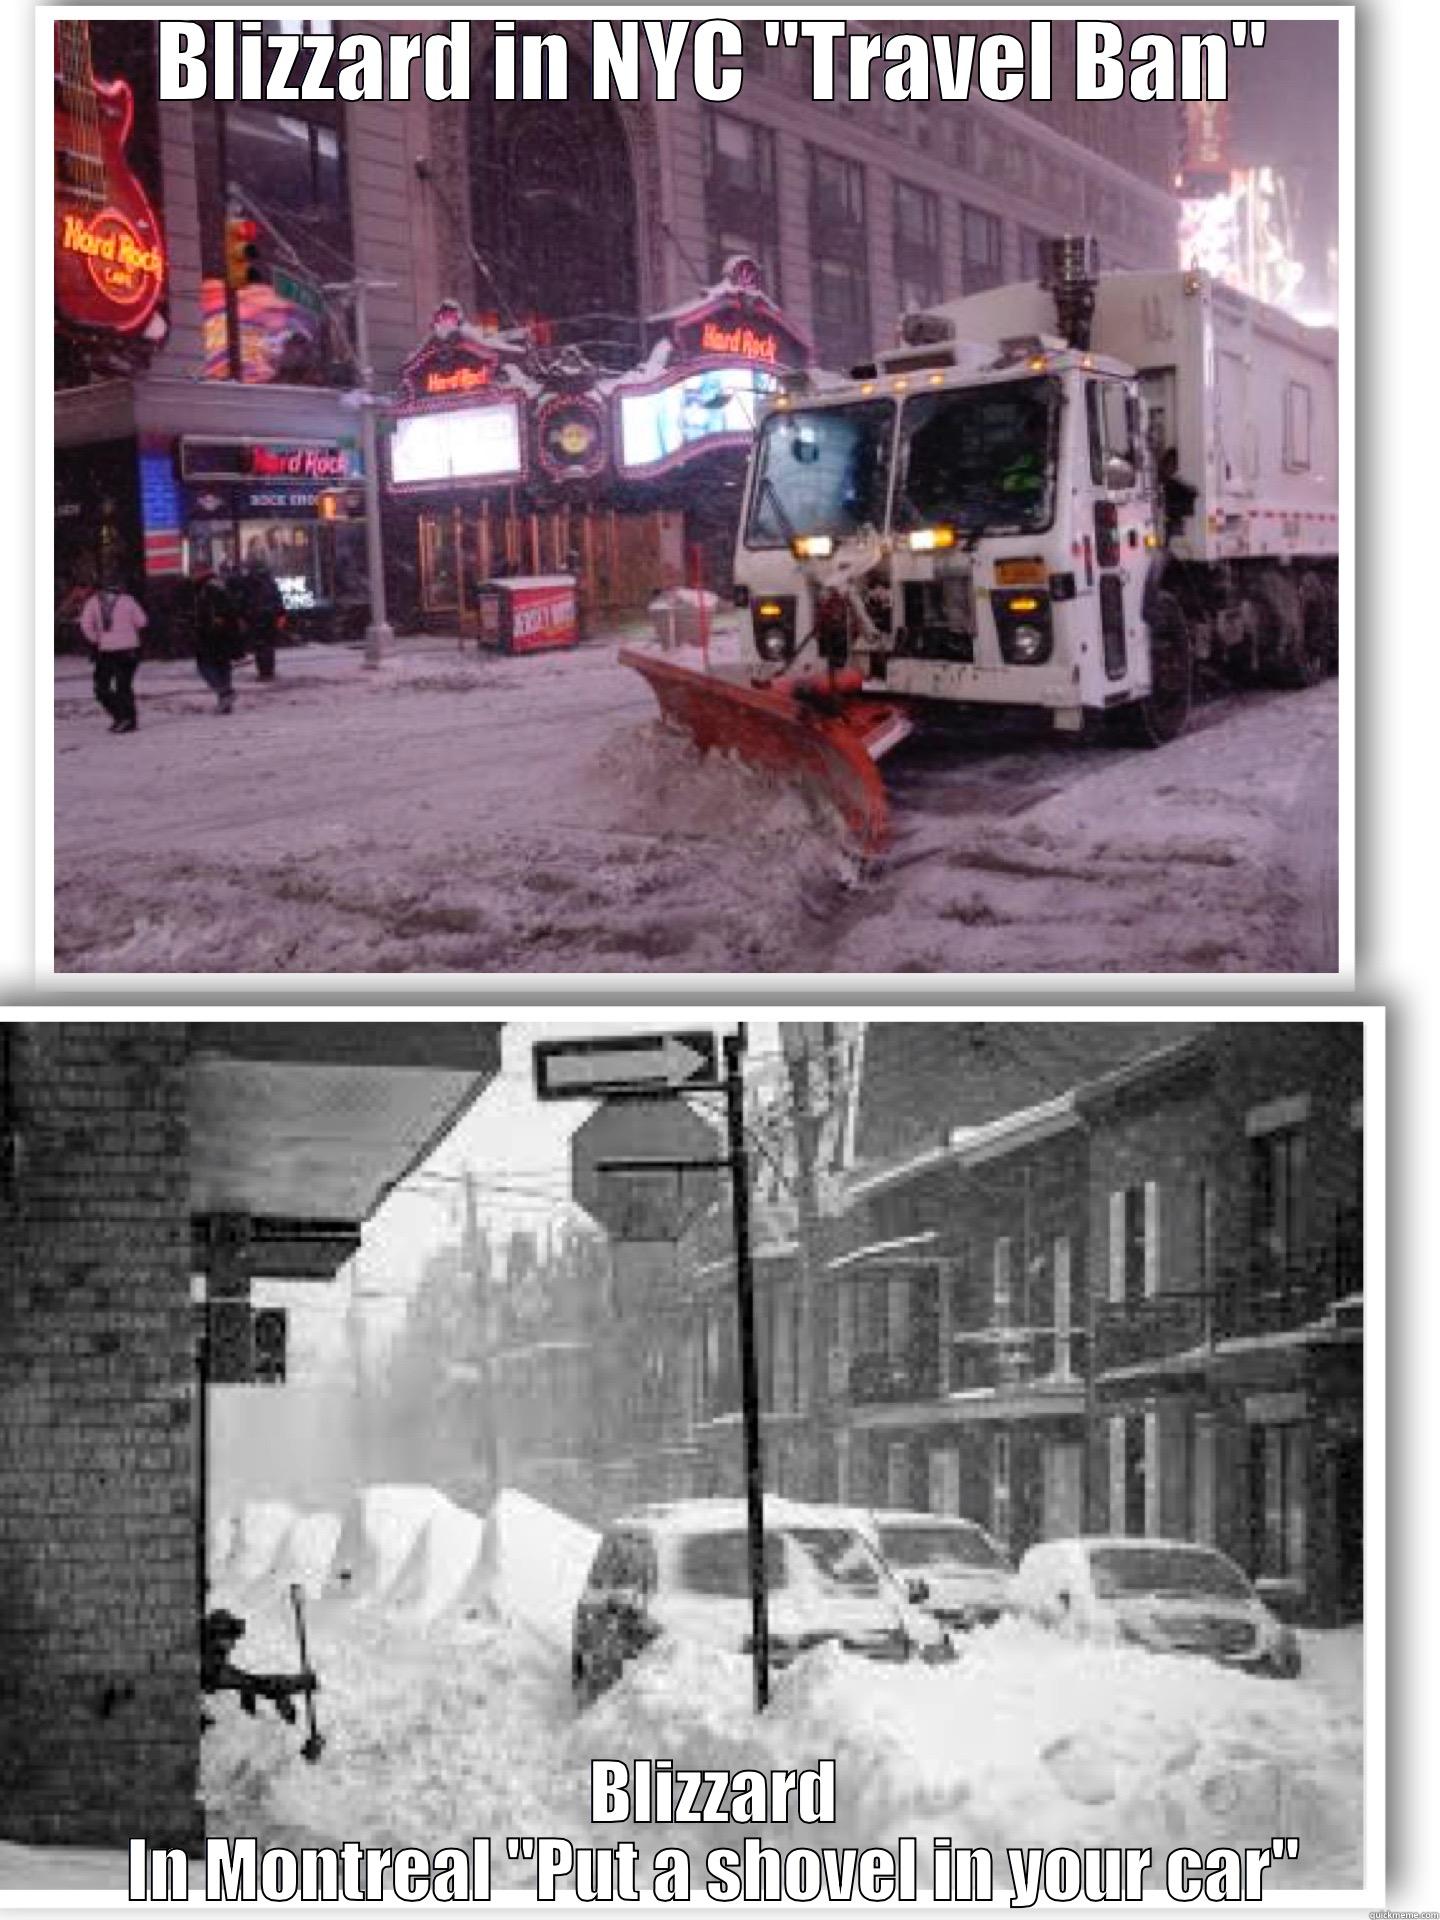 Winter in 2 cities - BLIZZARD IN NYC 